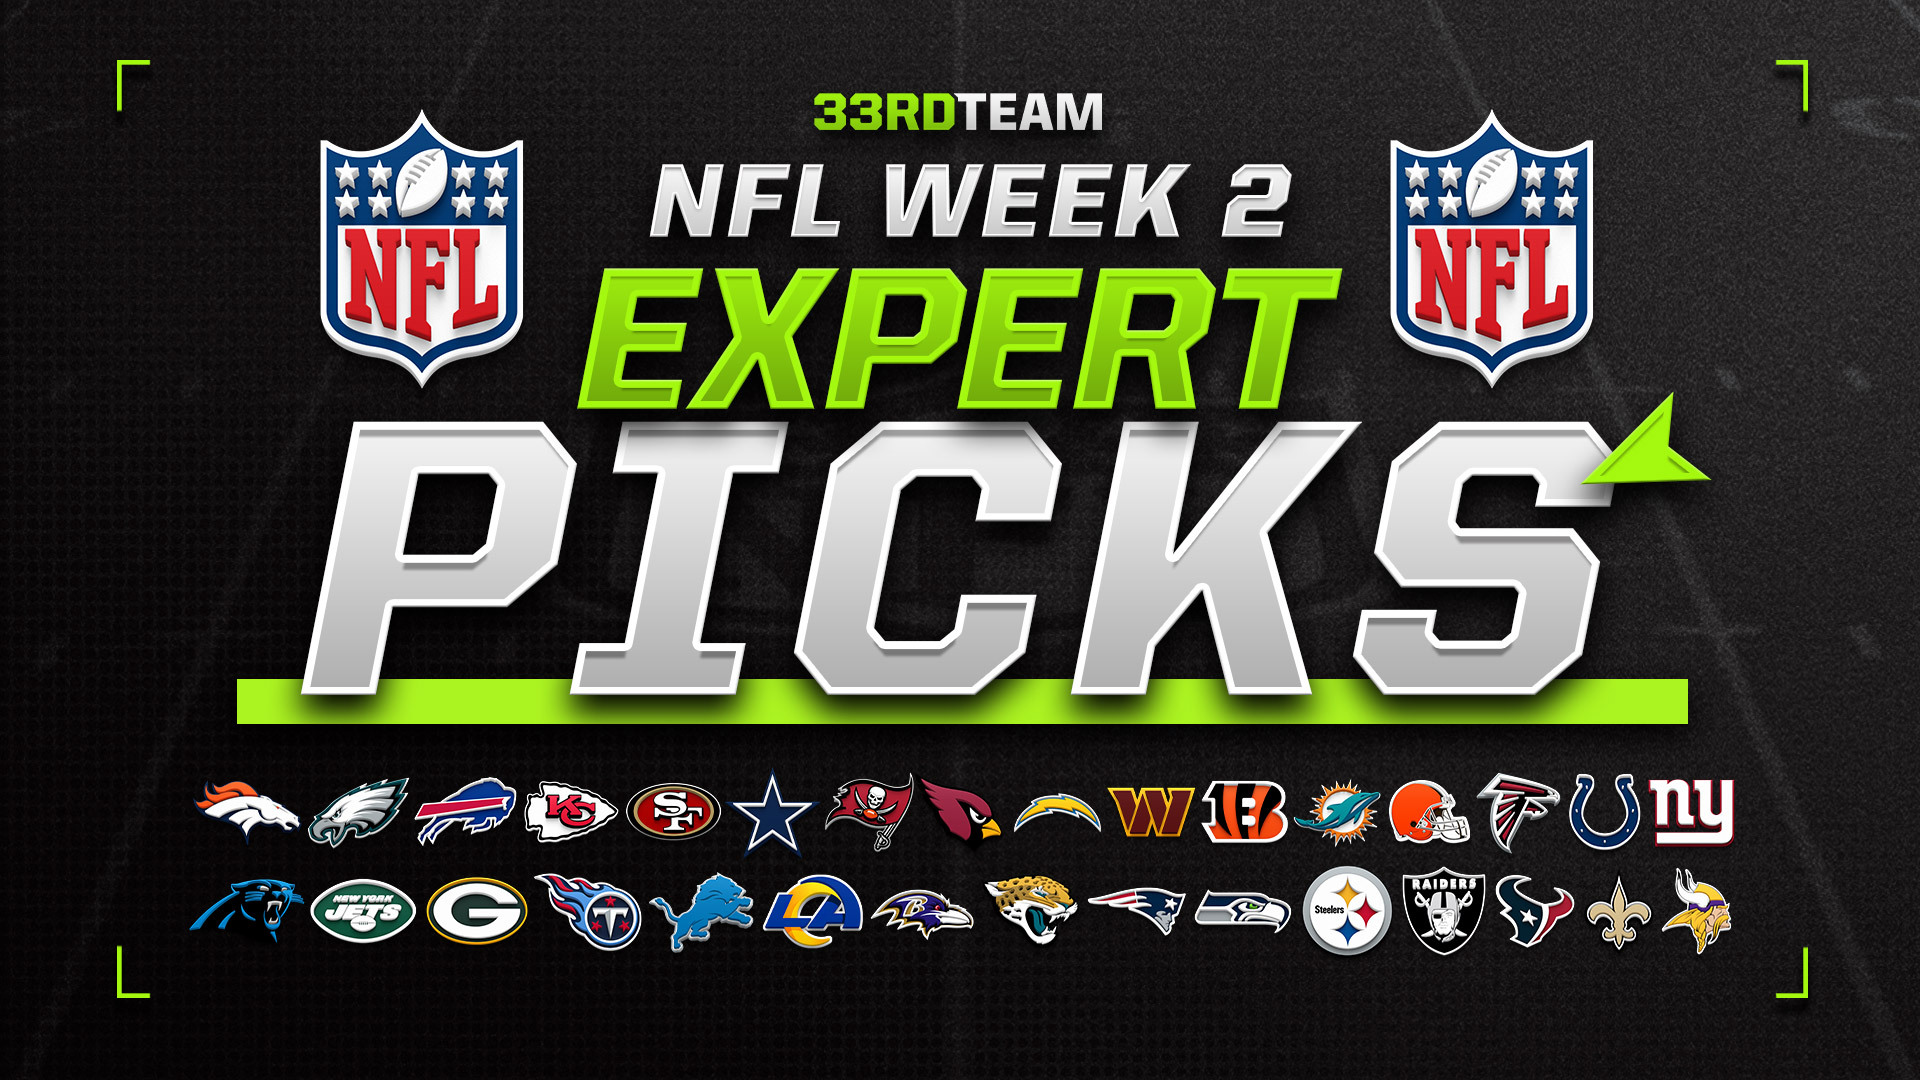 Text reads "NFL Week 2 Expert Picks" and has images of all the NFL logos along the bottom of the graphic